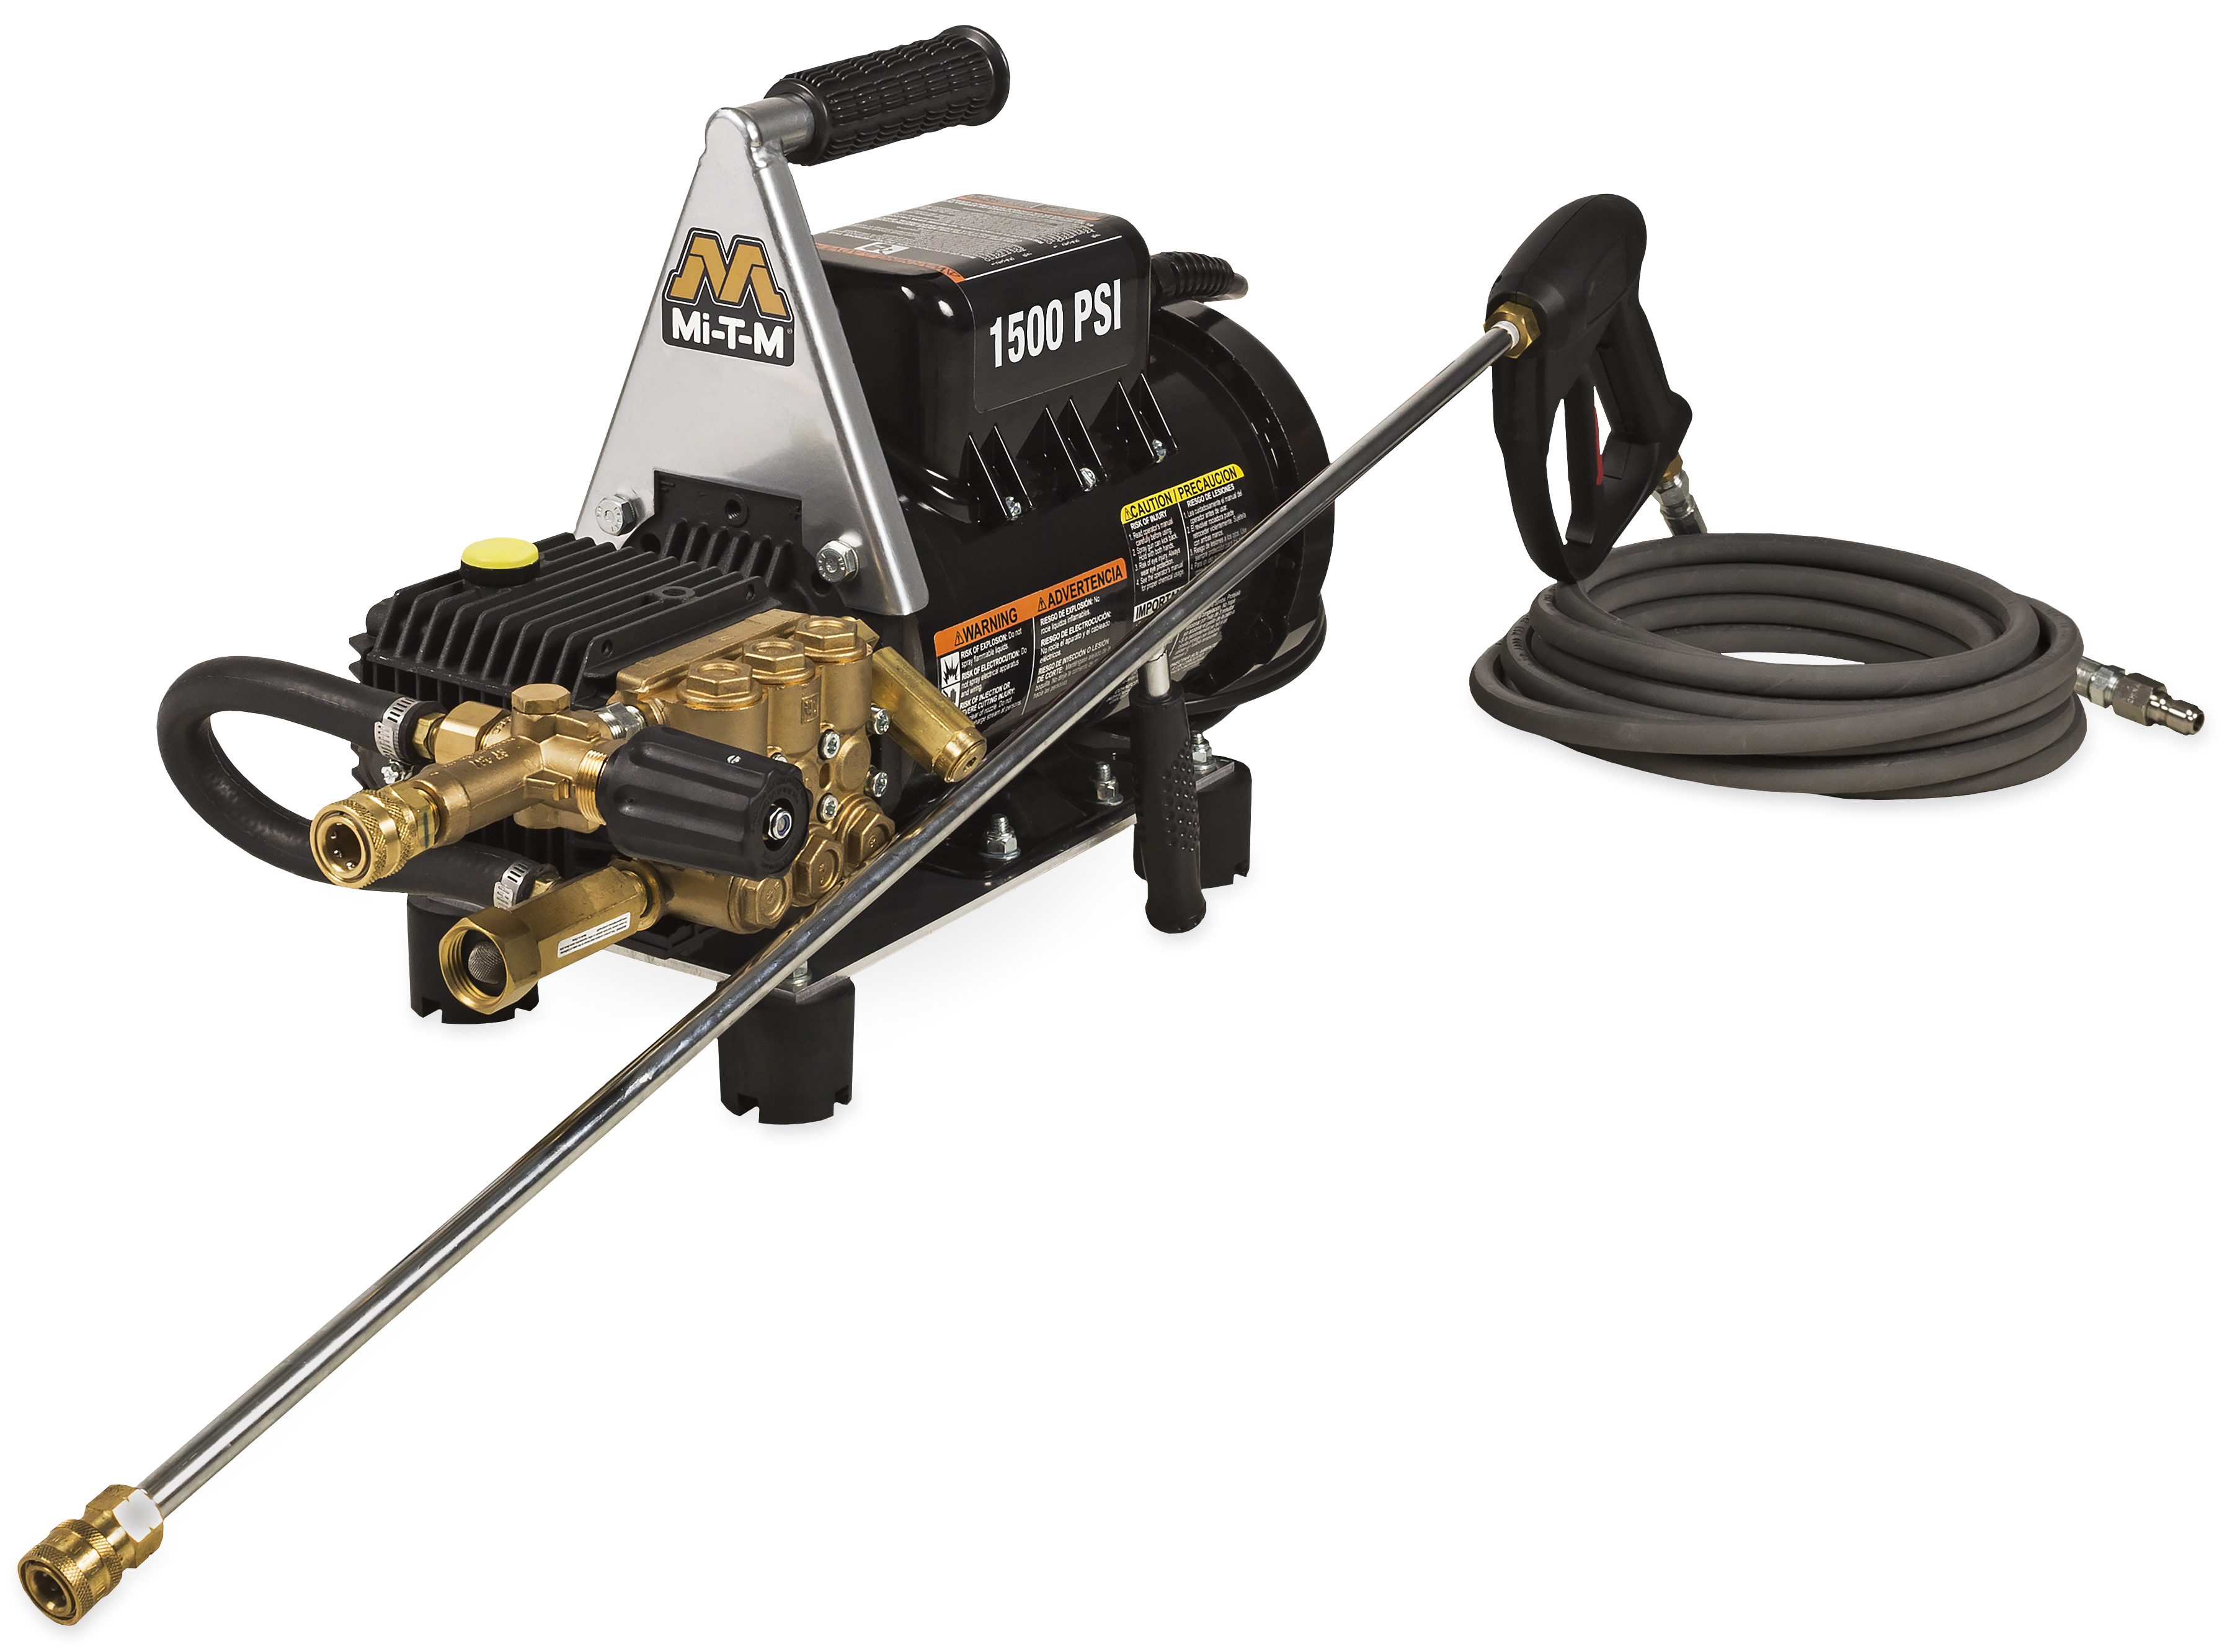 Mi-T-M DC-1502-H0E1G Hand Carry Cold Water Pressure Washer - Ben's ...